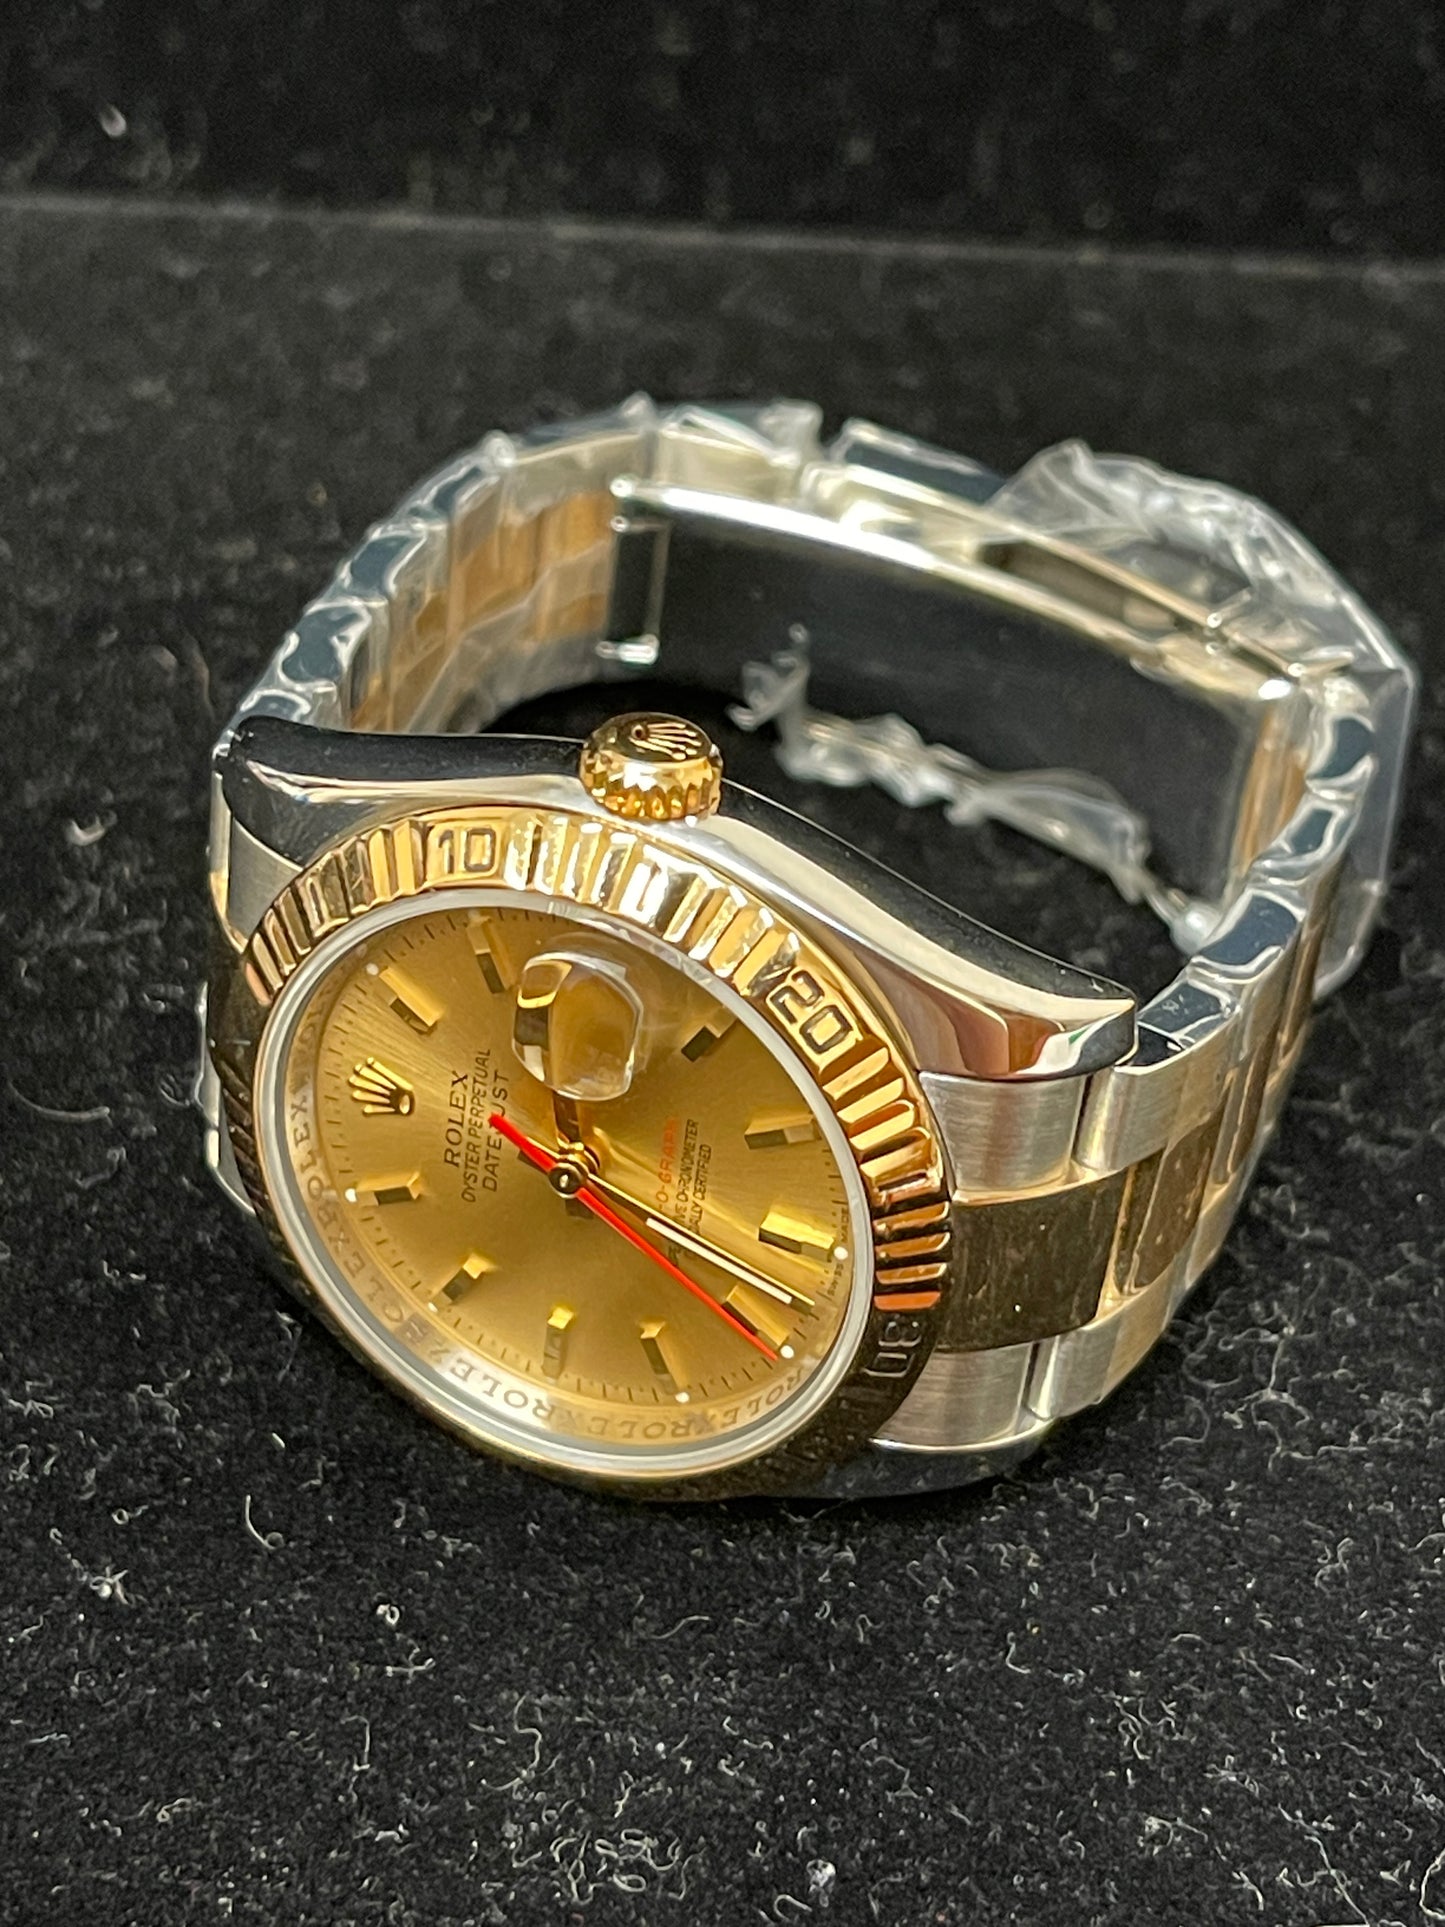 2006 Rolex Datejust Turn-O-Graph 116263 Champagne Dial TT Oyster No Papers 36mm